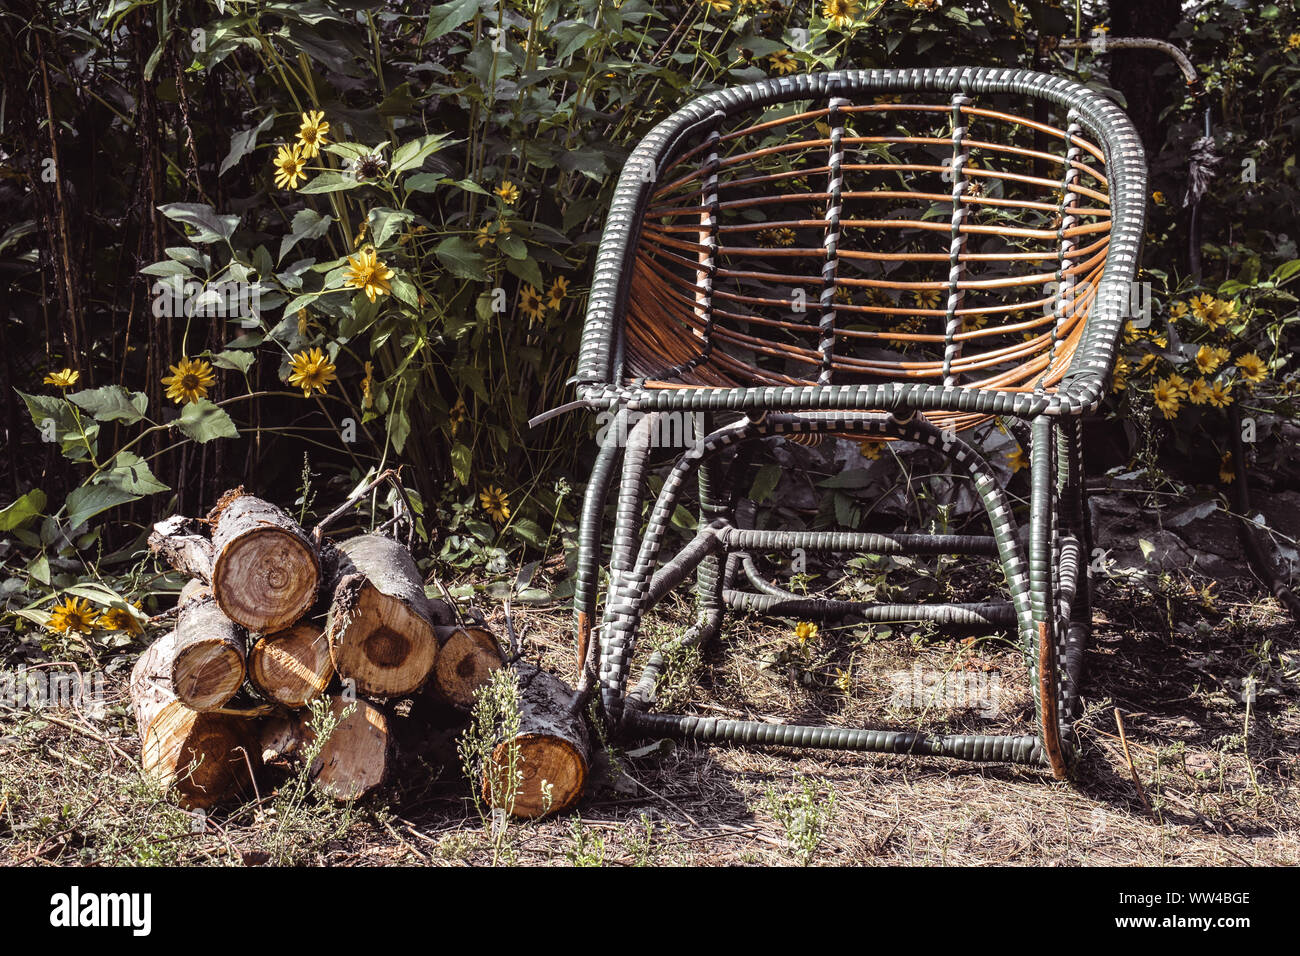 Rocking chair in the open air. Wicker chairs for relaxing. Stock Photo